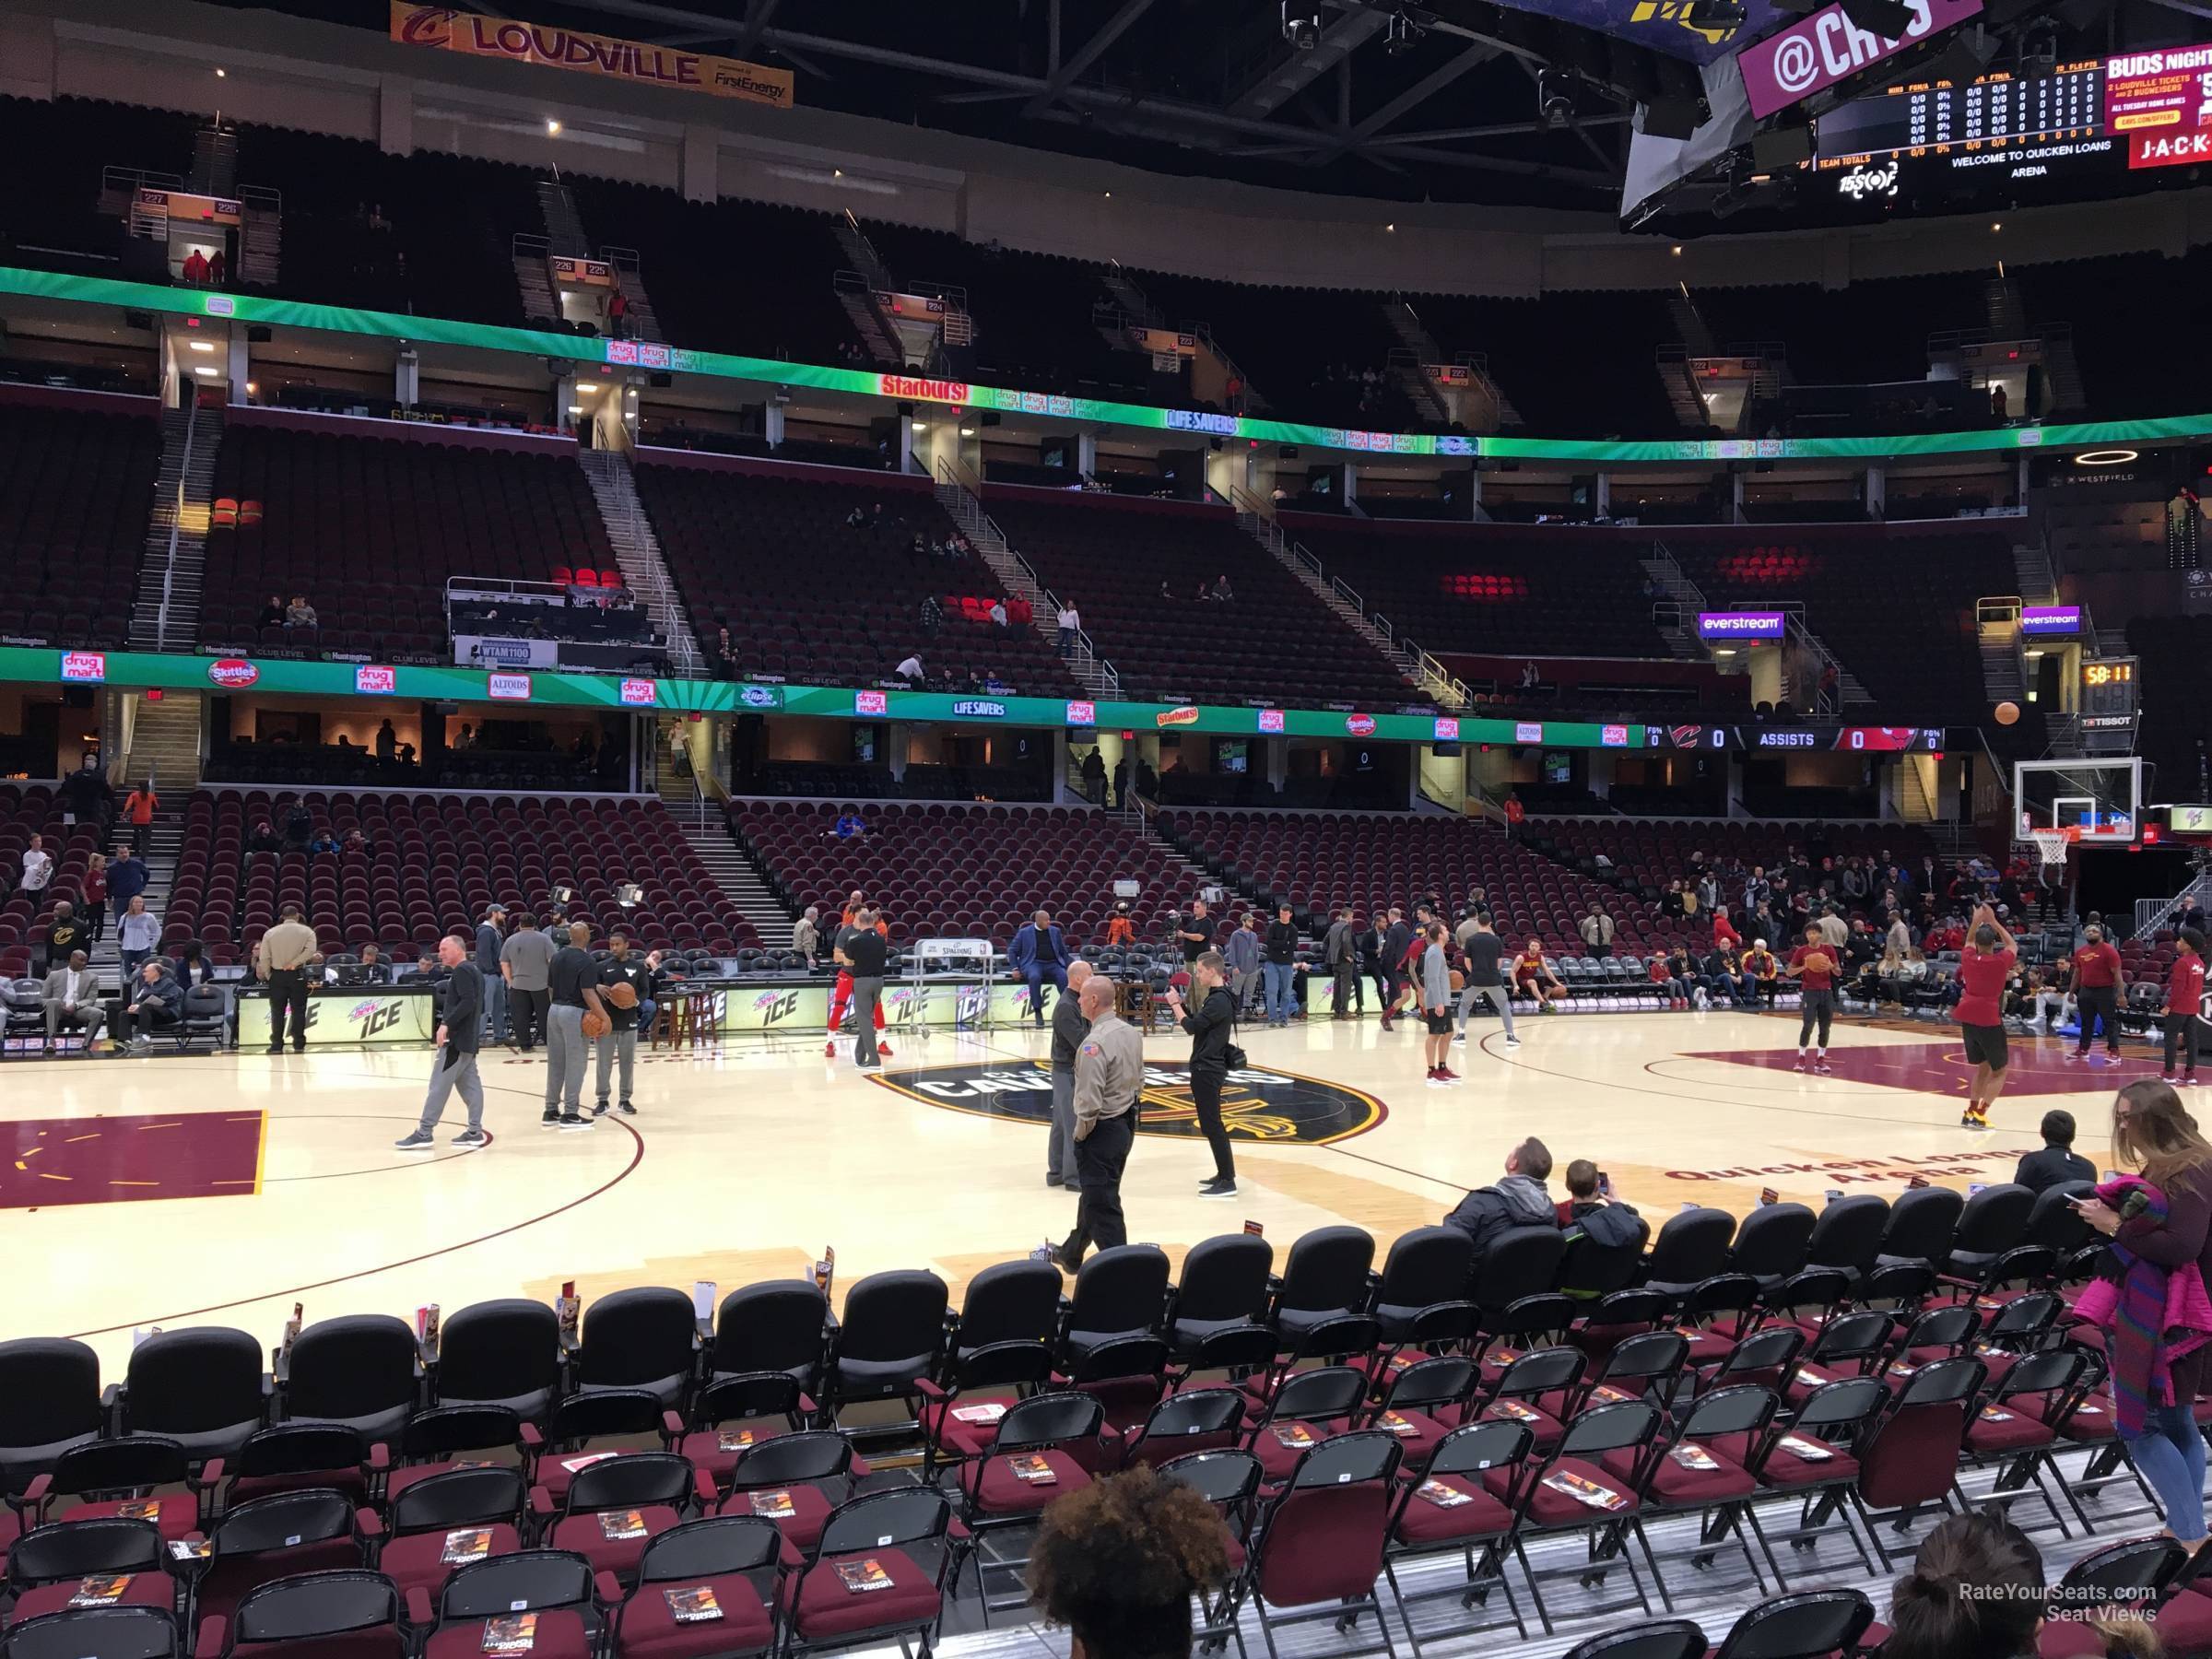 section 121, row 5 seat view  for basketball - rocket mortgage fieldhouse